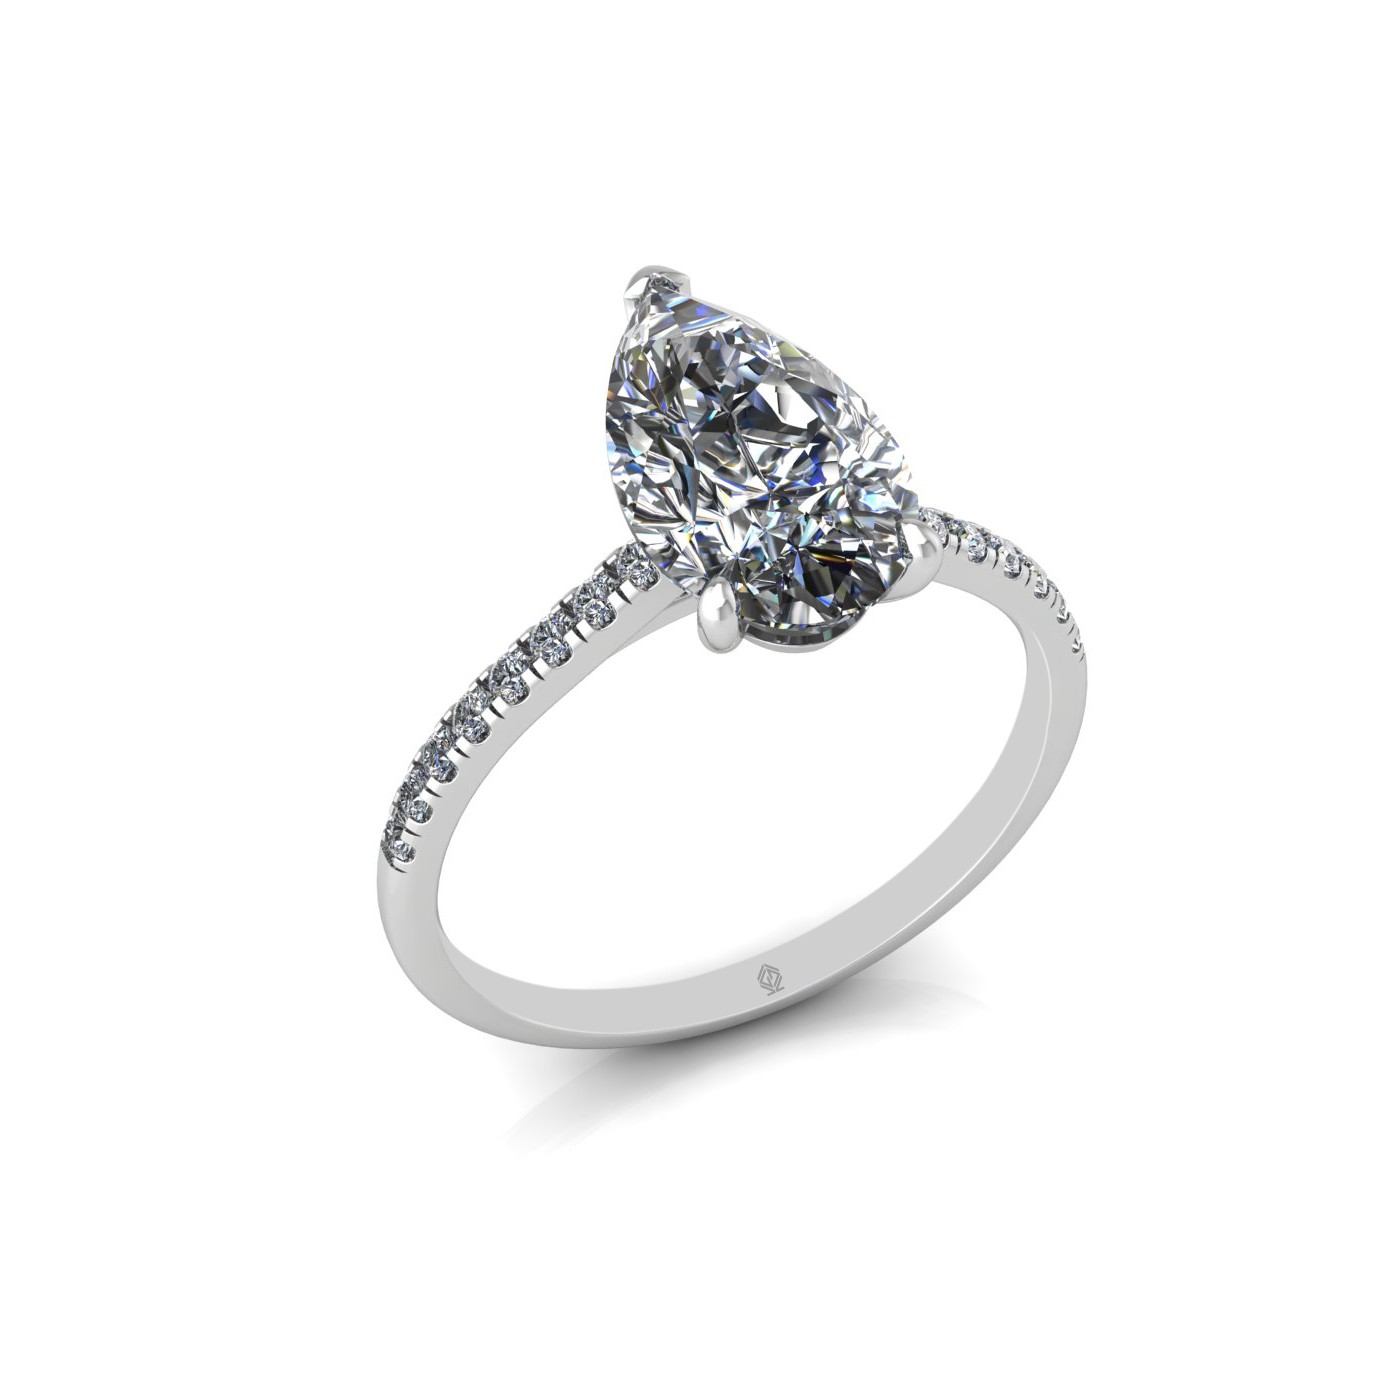 18k white gold 2,00 ct 3 prongs pear diamond engagement ring with whisper thin pavÉ set band